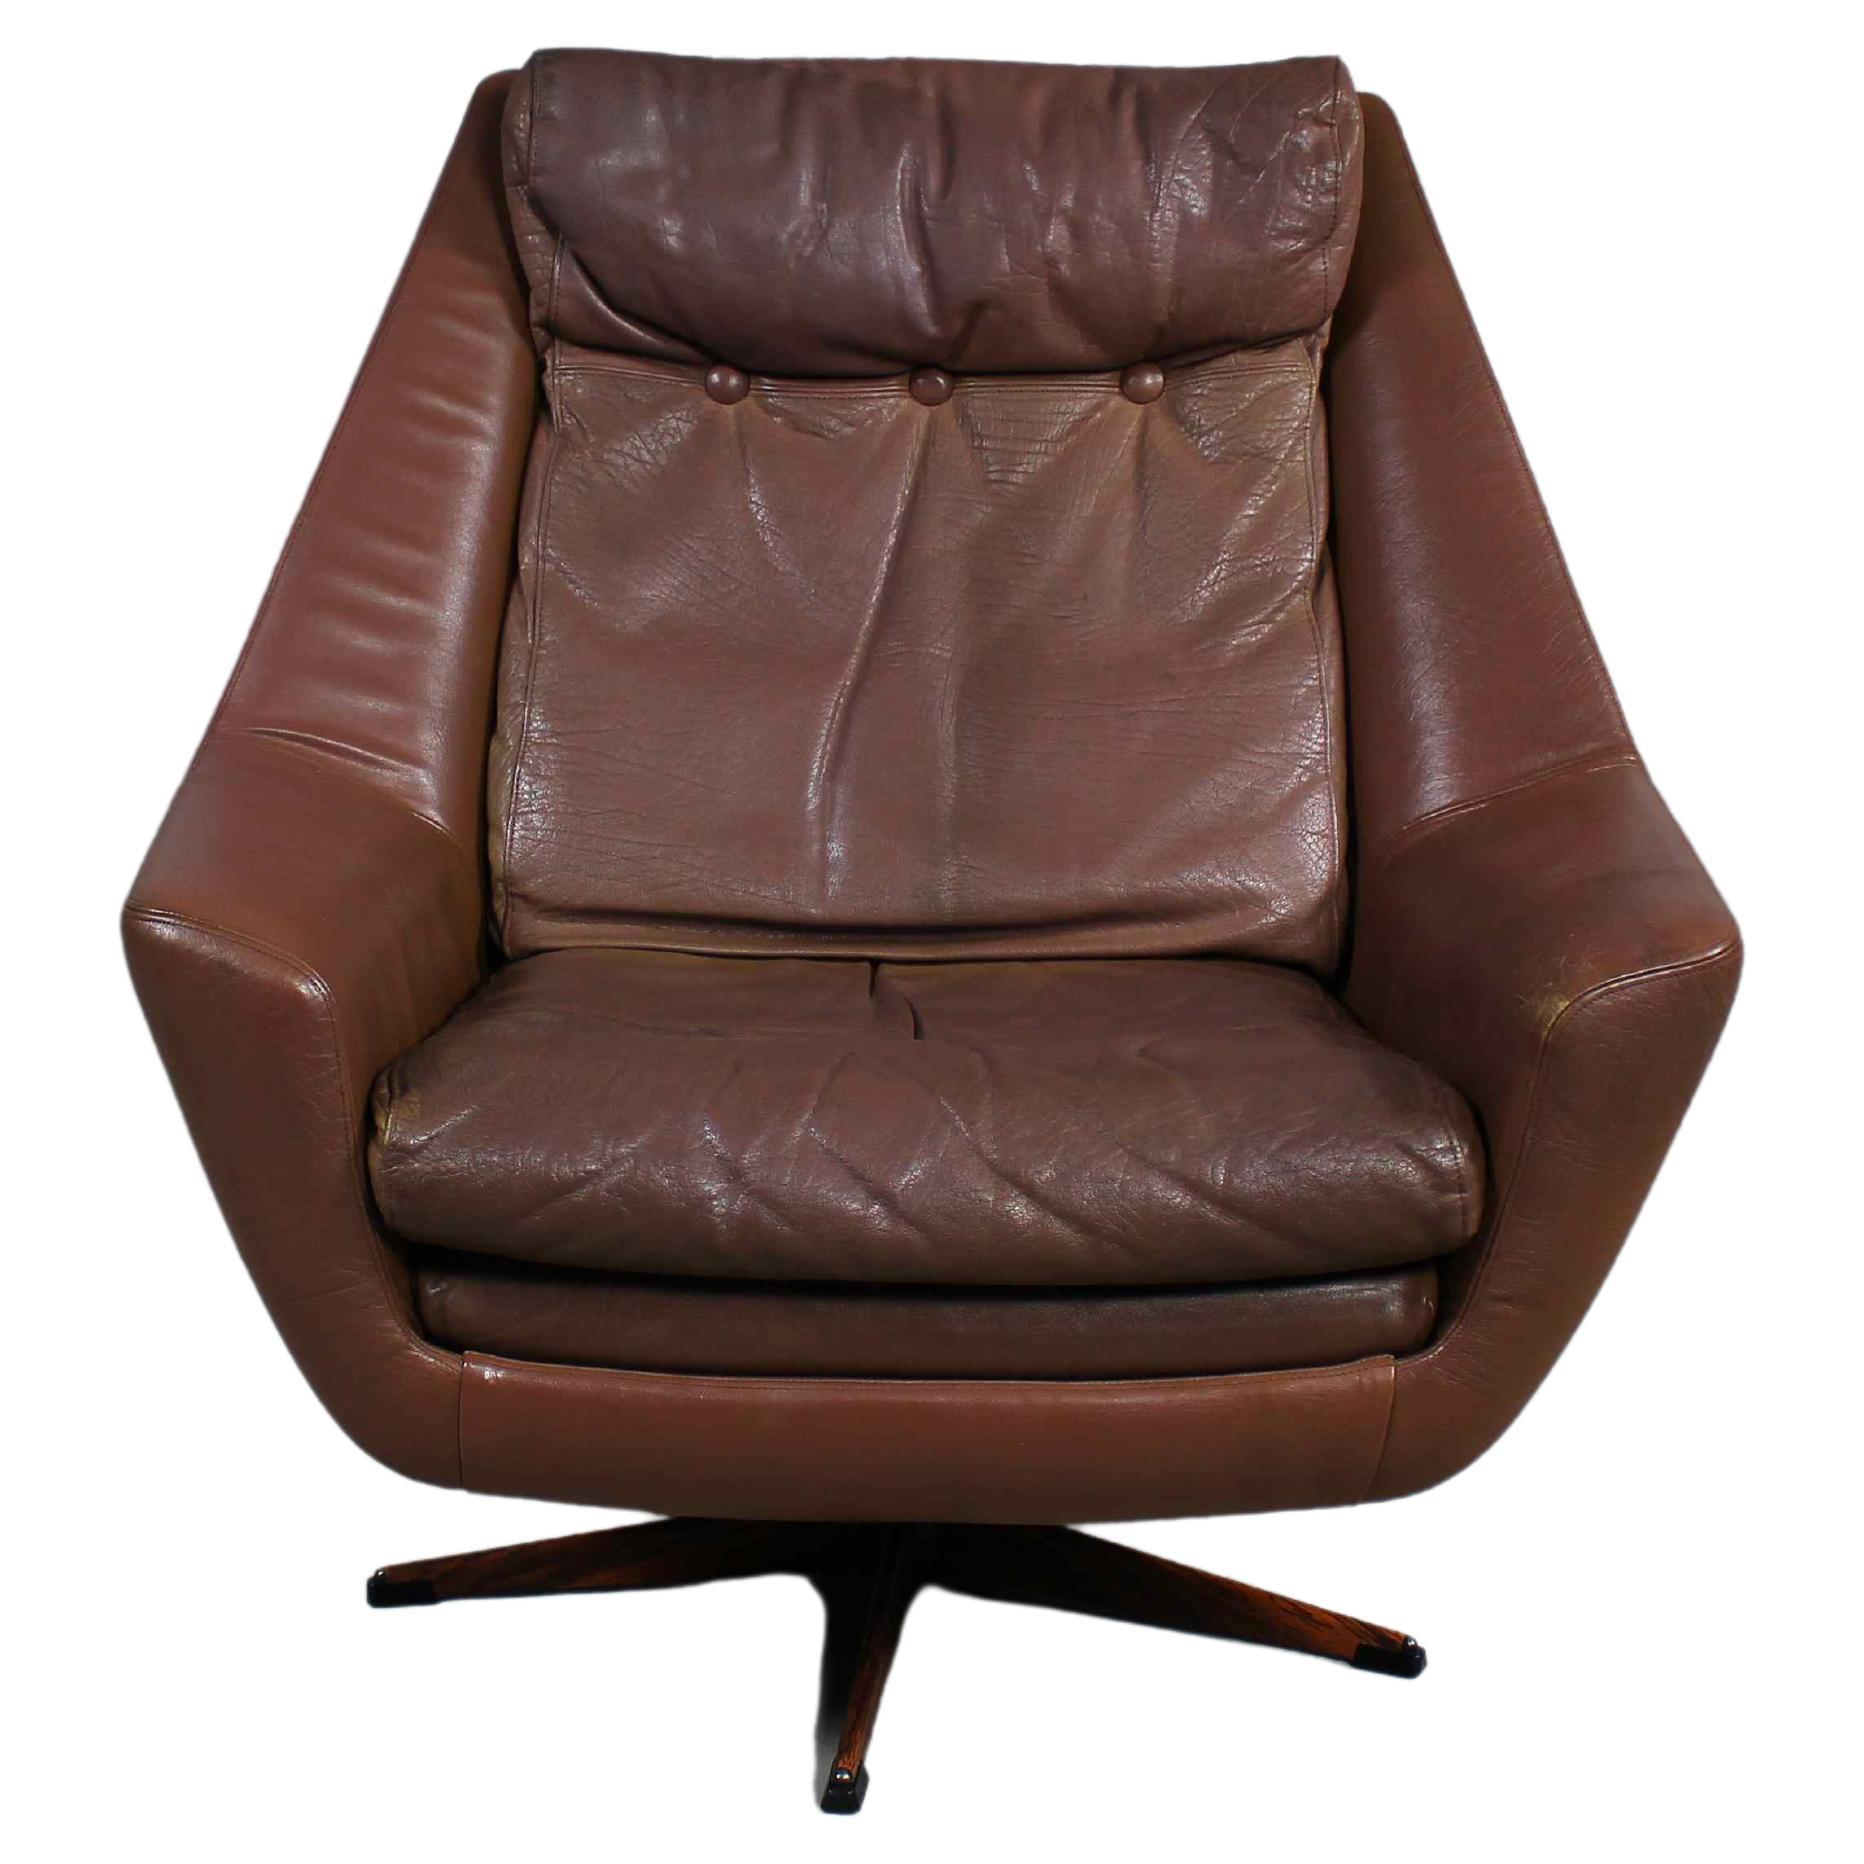 Made in Denmark 1960s, manufactured by Erhardsen & Andersen,
stunning Retro Mid-Century Modern lounge chair,
upholstered in soft brown leather,
with loose cushions on the seat and backrest,
standing on a five star swivel base.
 